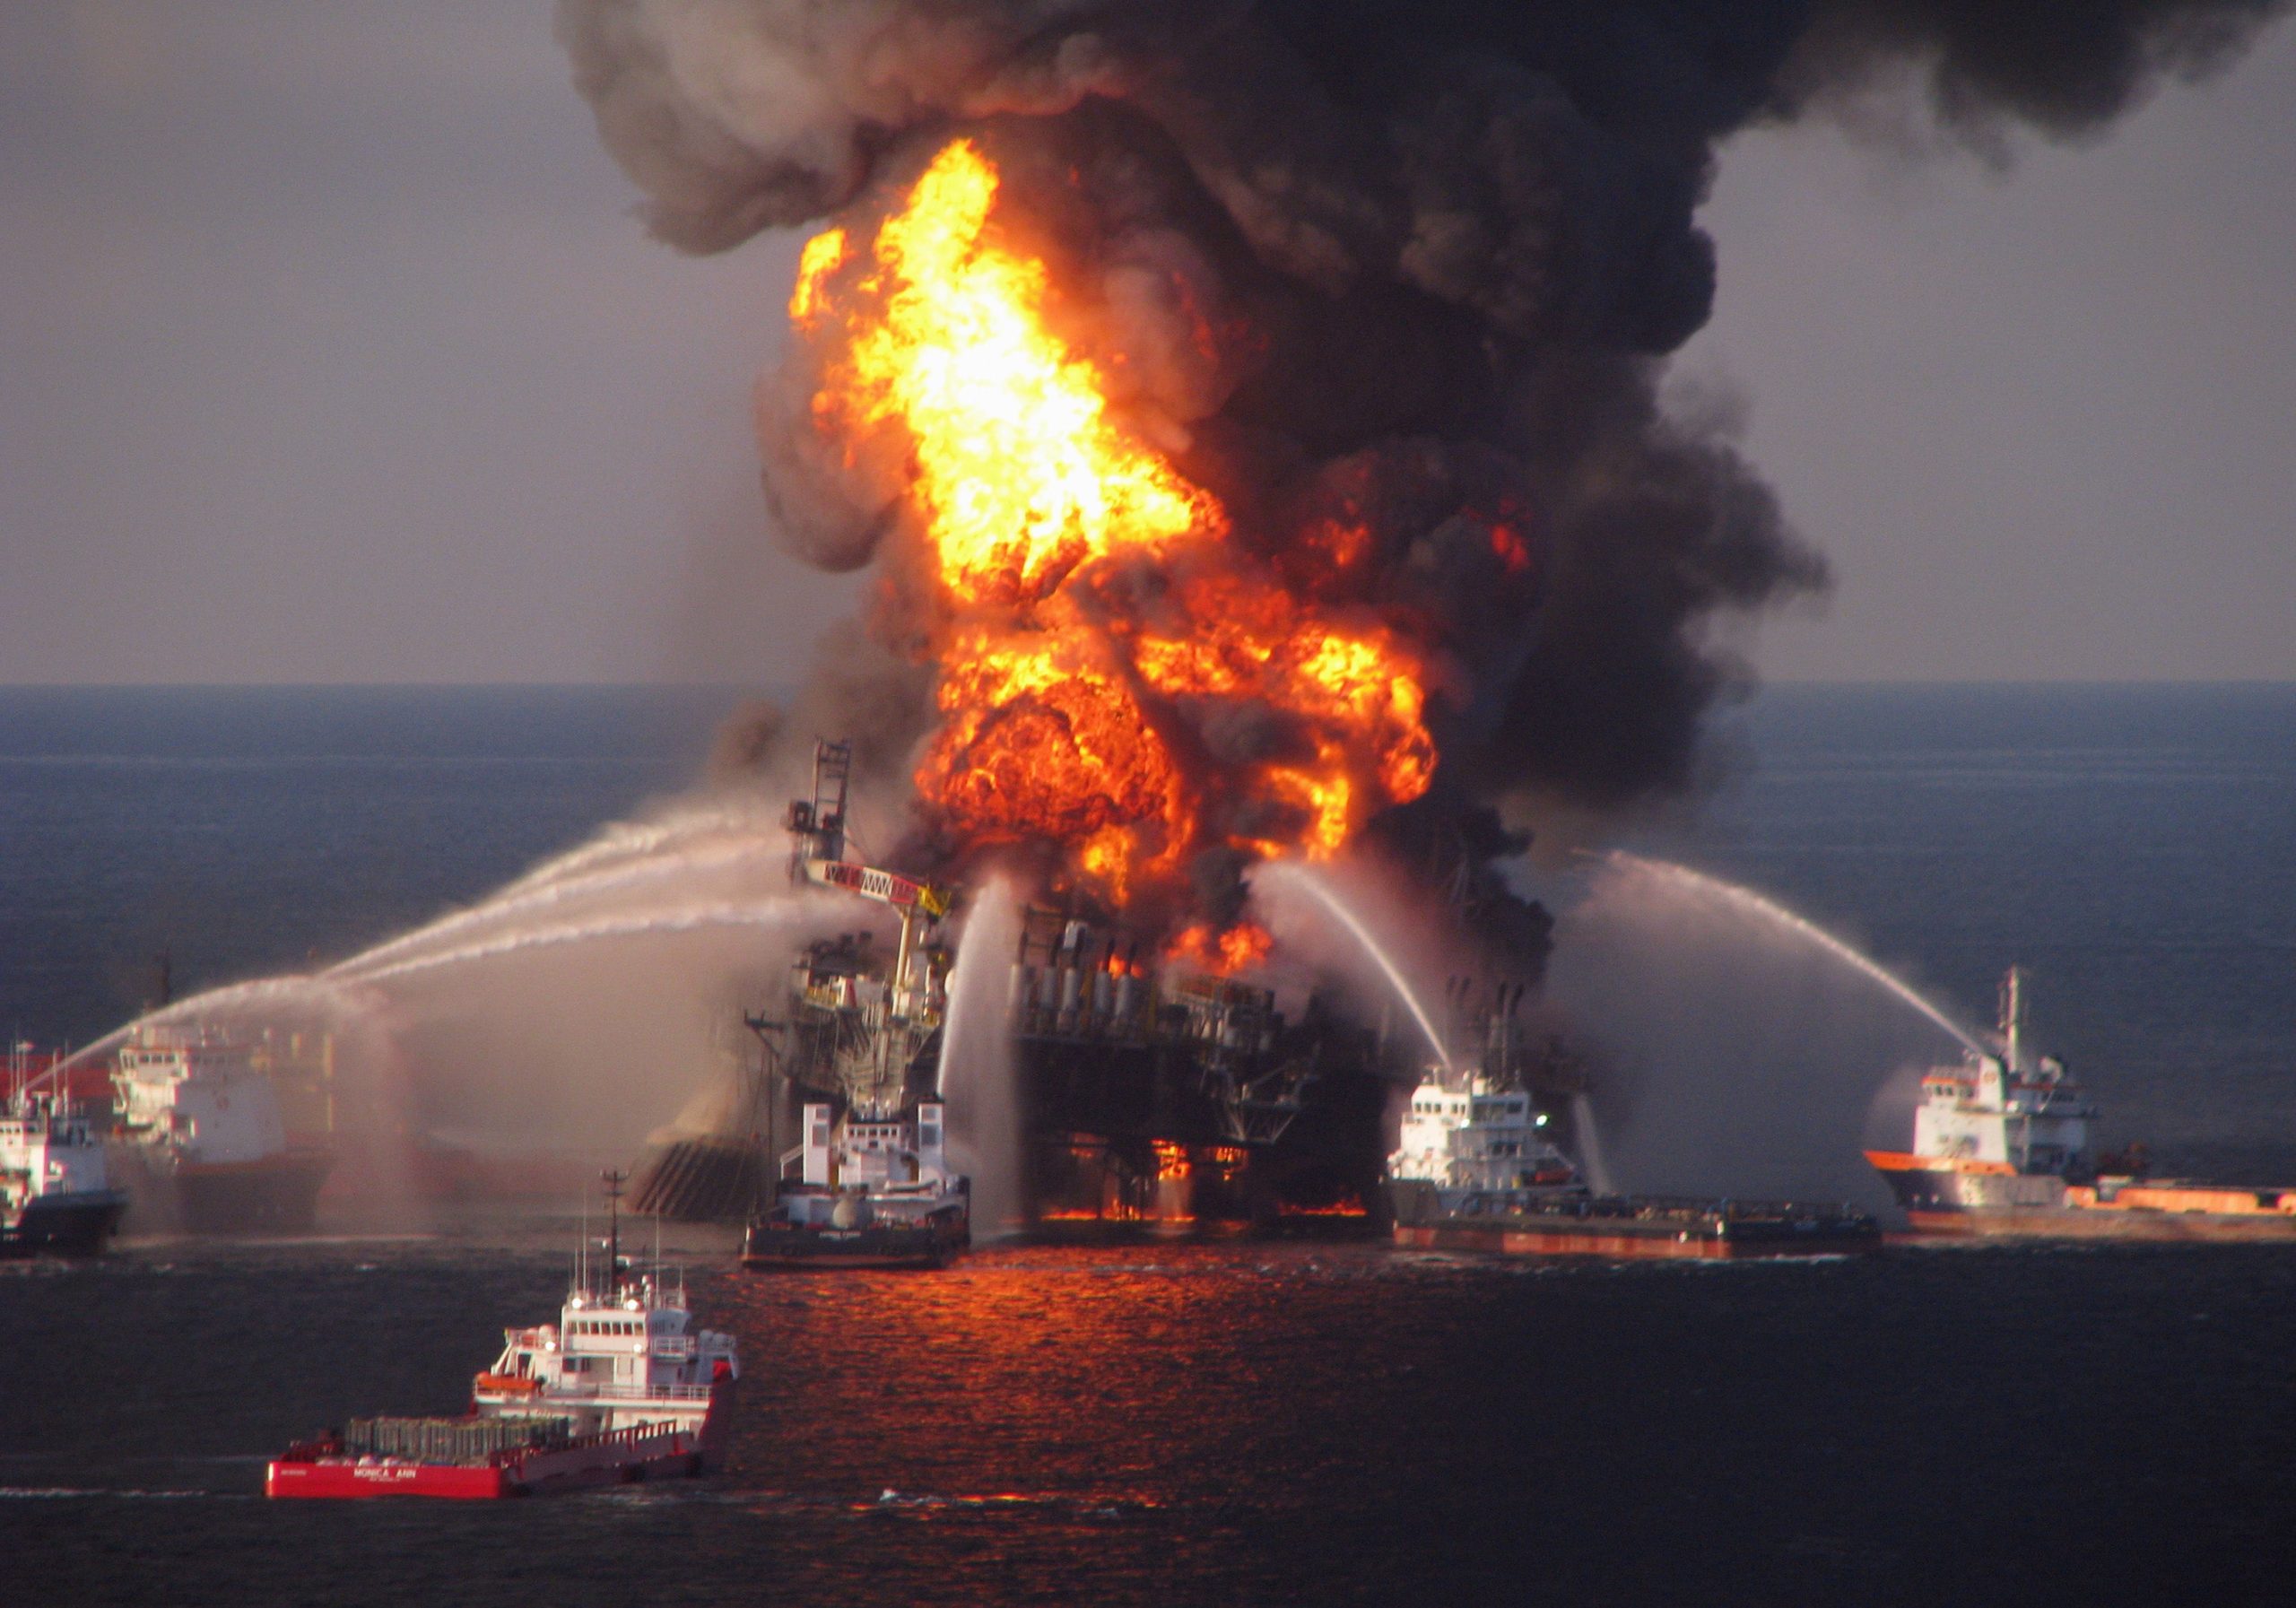 Fire boat response crews spray water on the burning BP Deepwater Horizon offshore oil rig on April 21, 2010. (Photo: U.S. Coast Guard, AP)